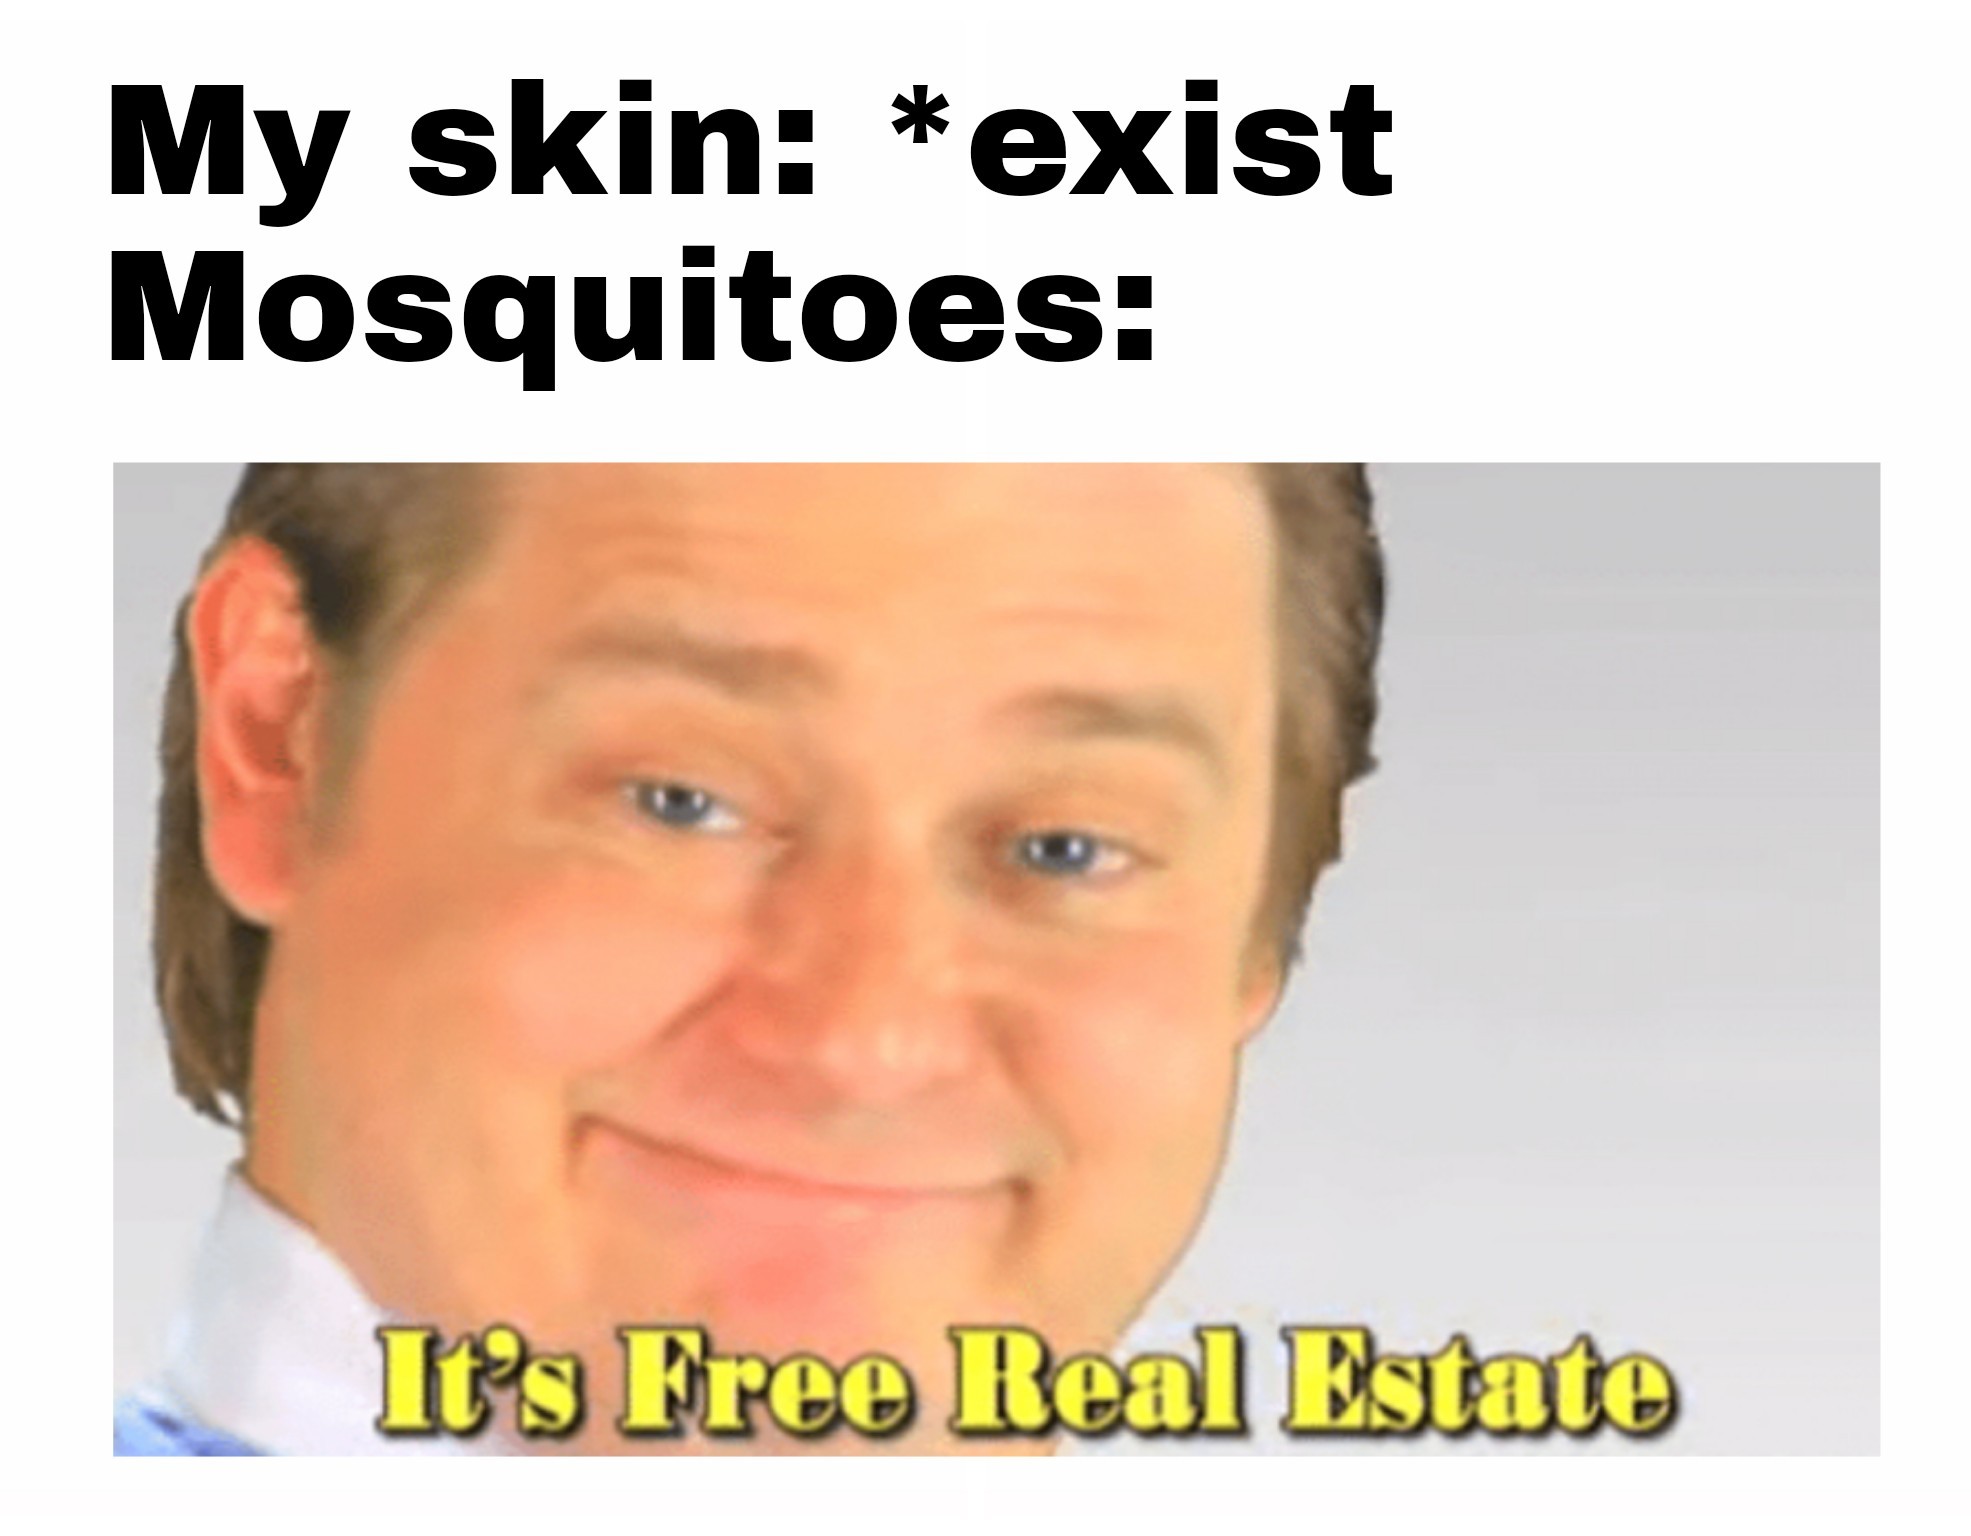 Mosquito meme that says mosquito free real estate meme - My skin exist Mosquitoes It's Free Real Estate